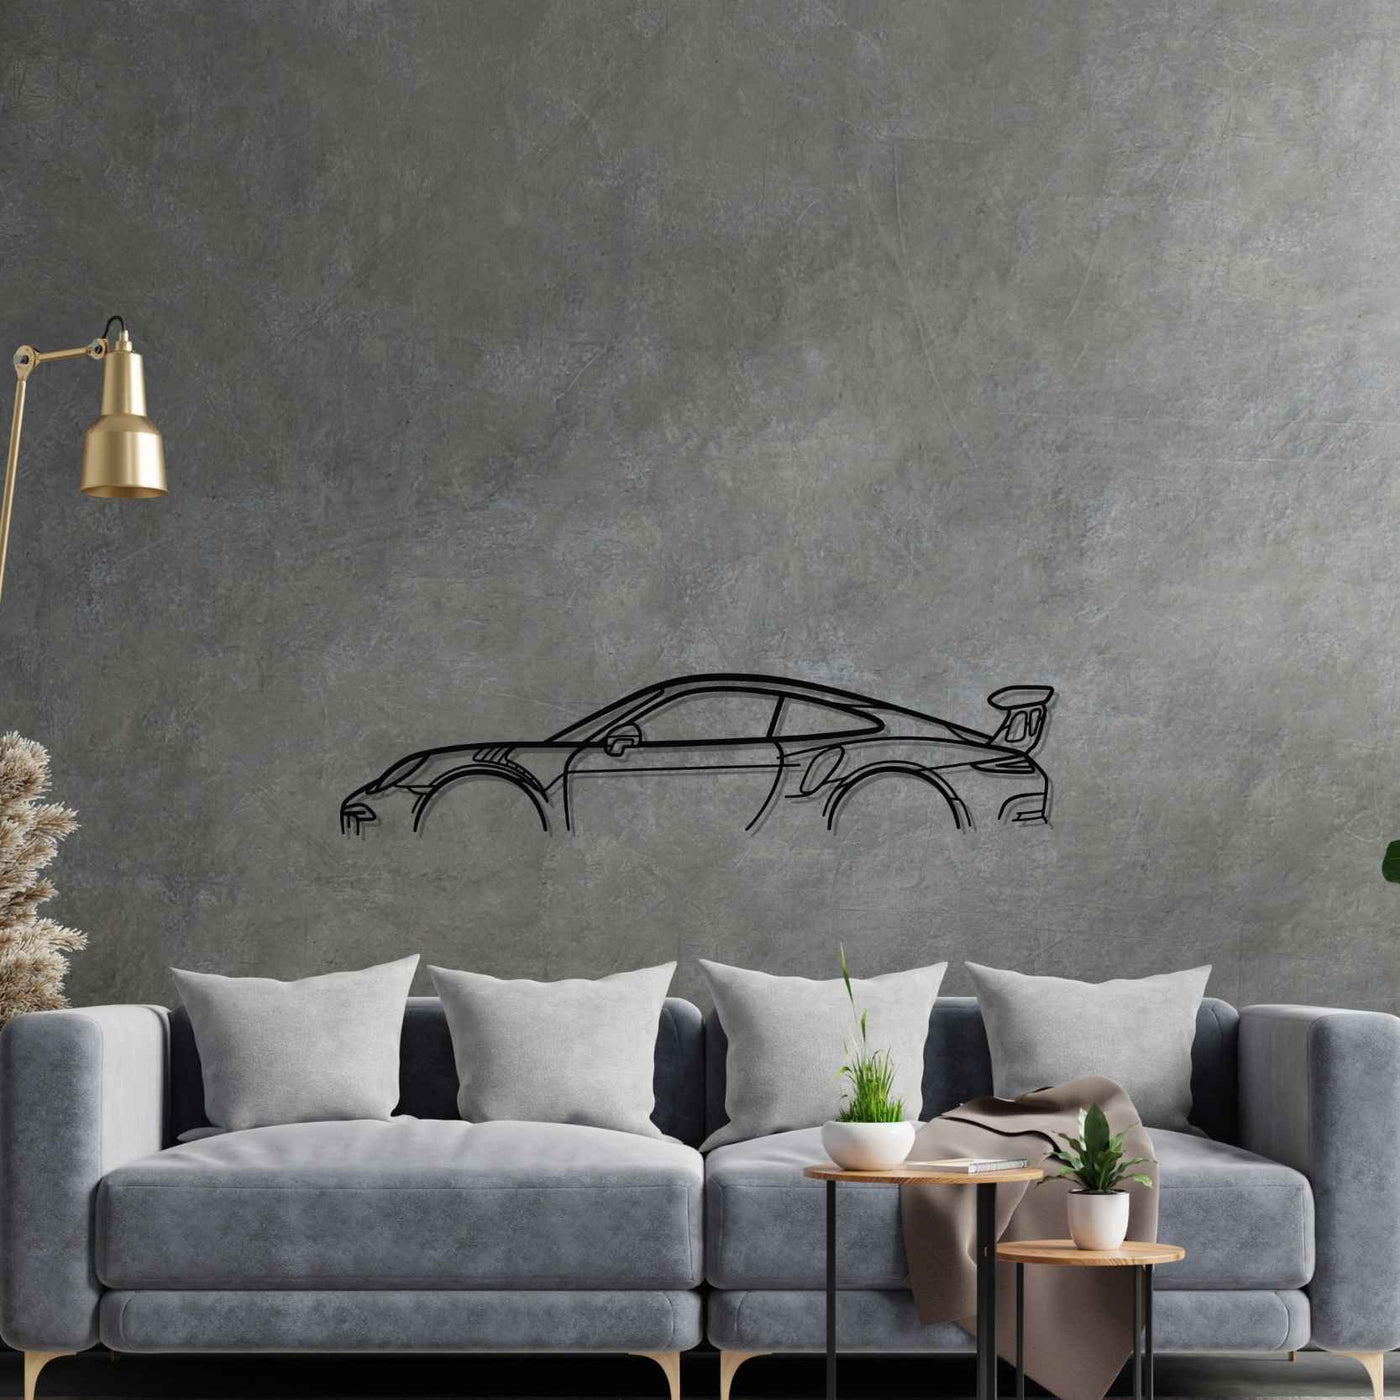 911 GT3 RS model 991 Classic Silhouette Metal Wall Art